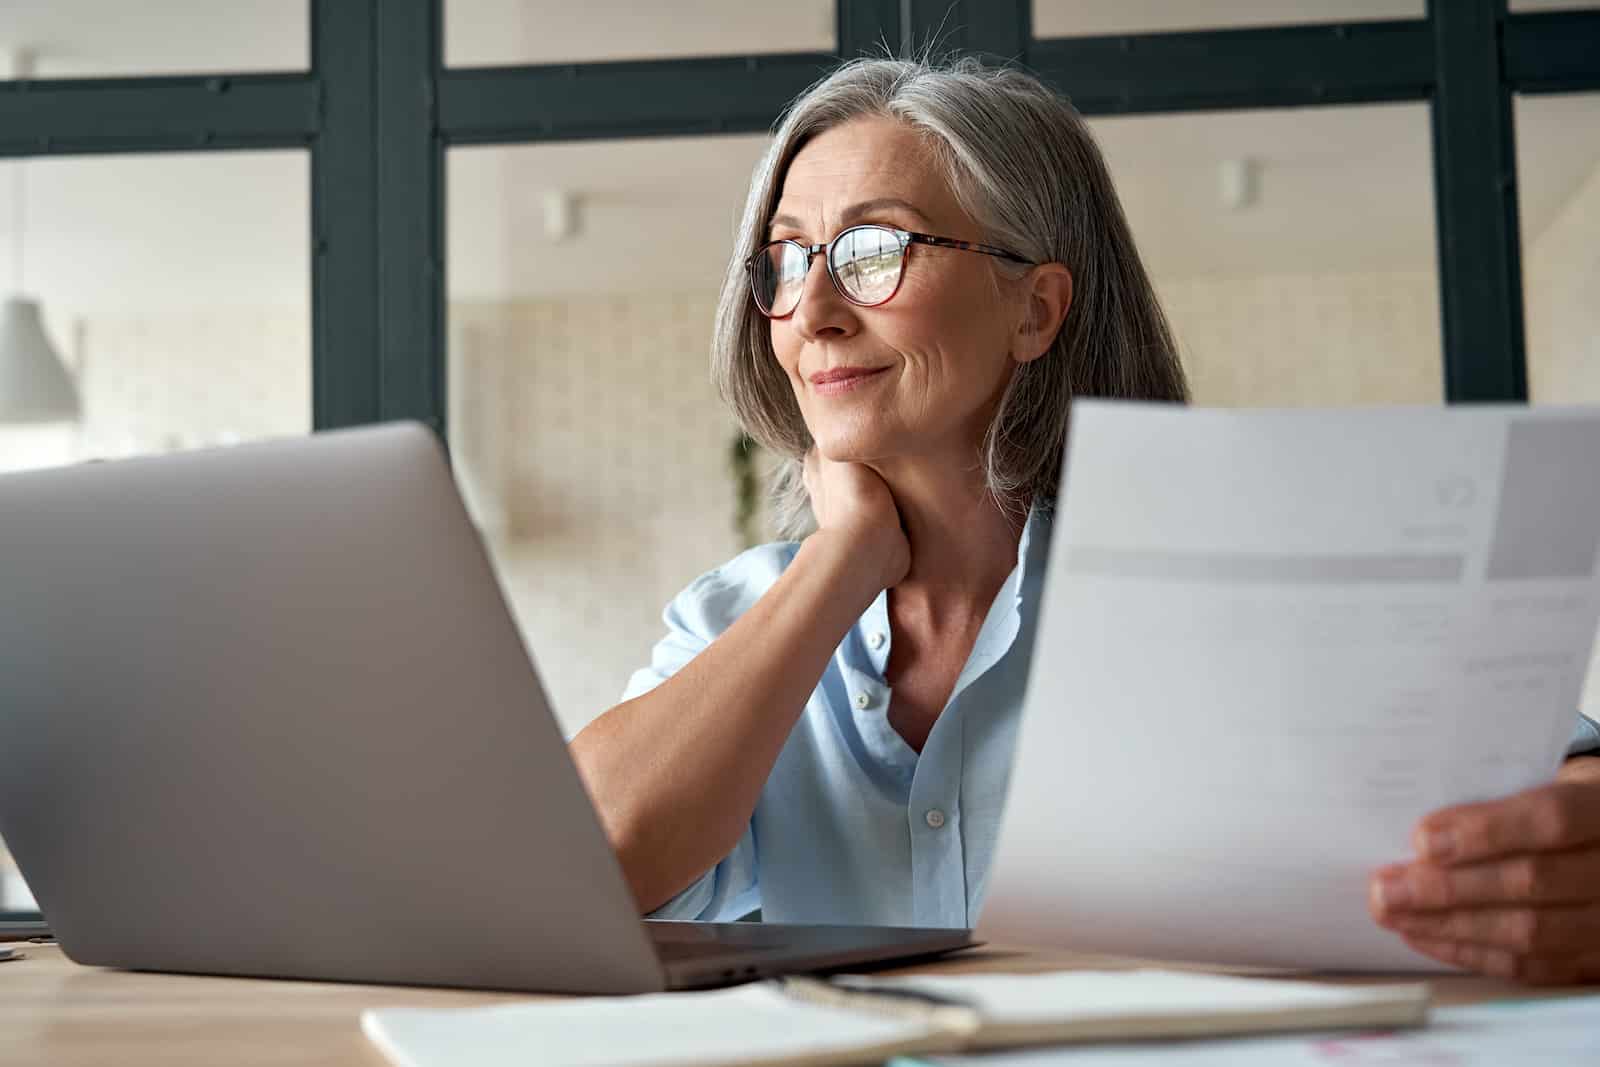 Woman with glasses looking at her computer screen holding a piece of paper